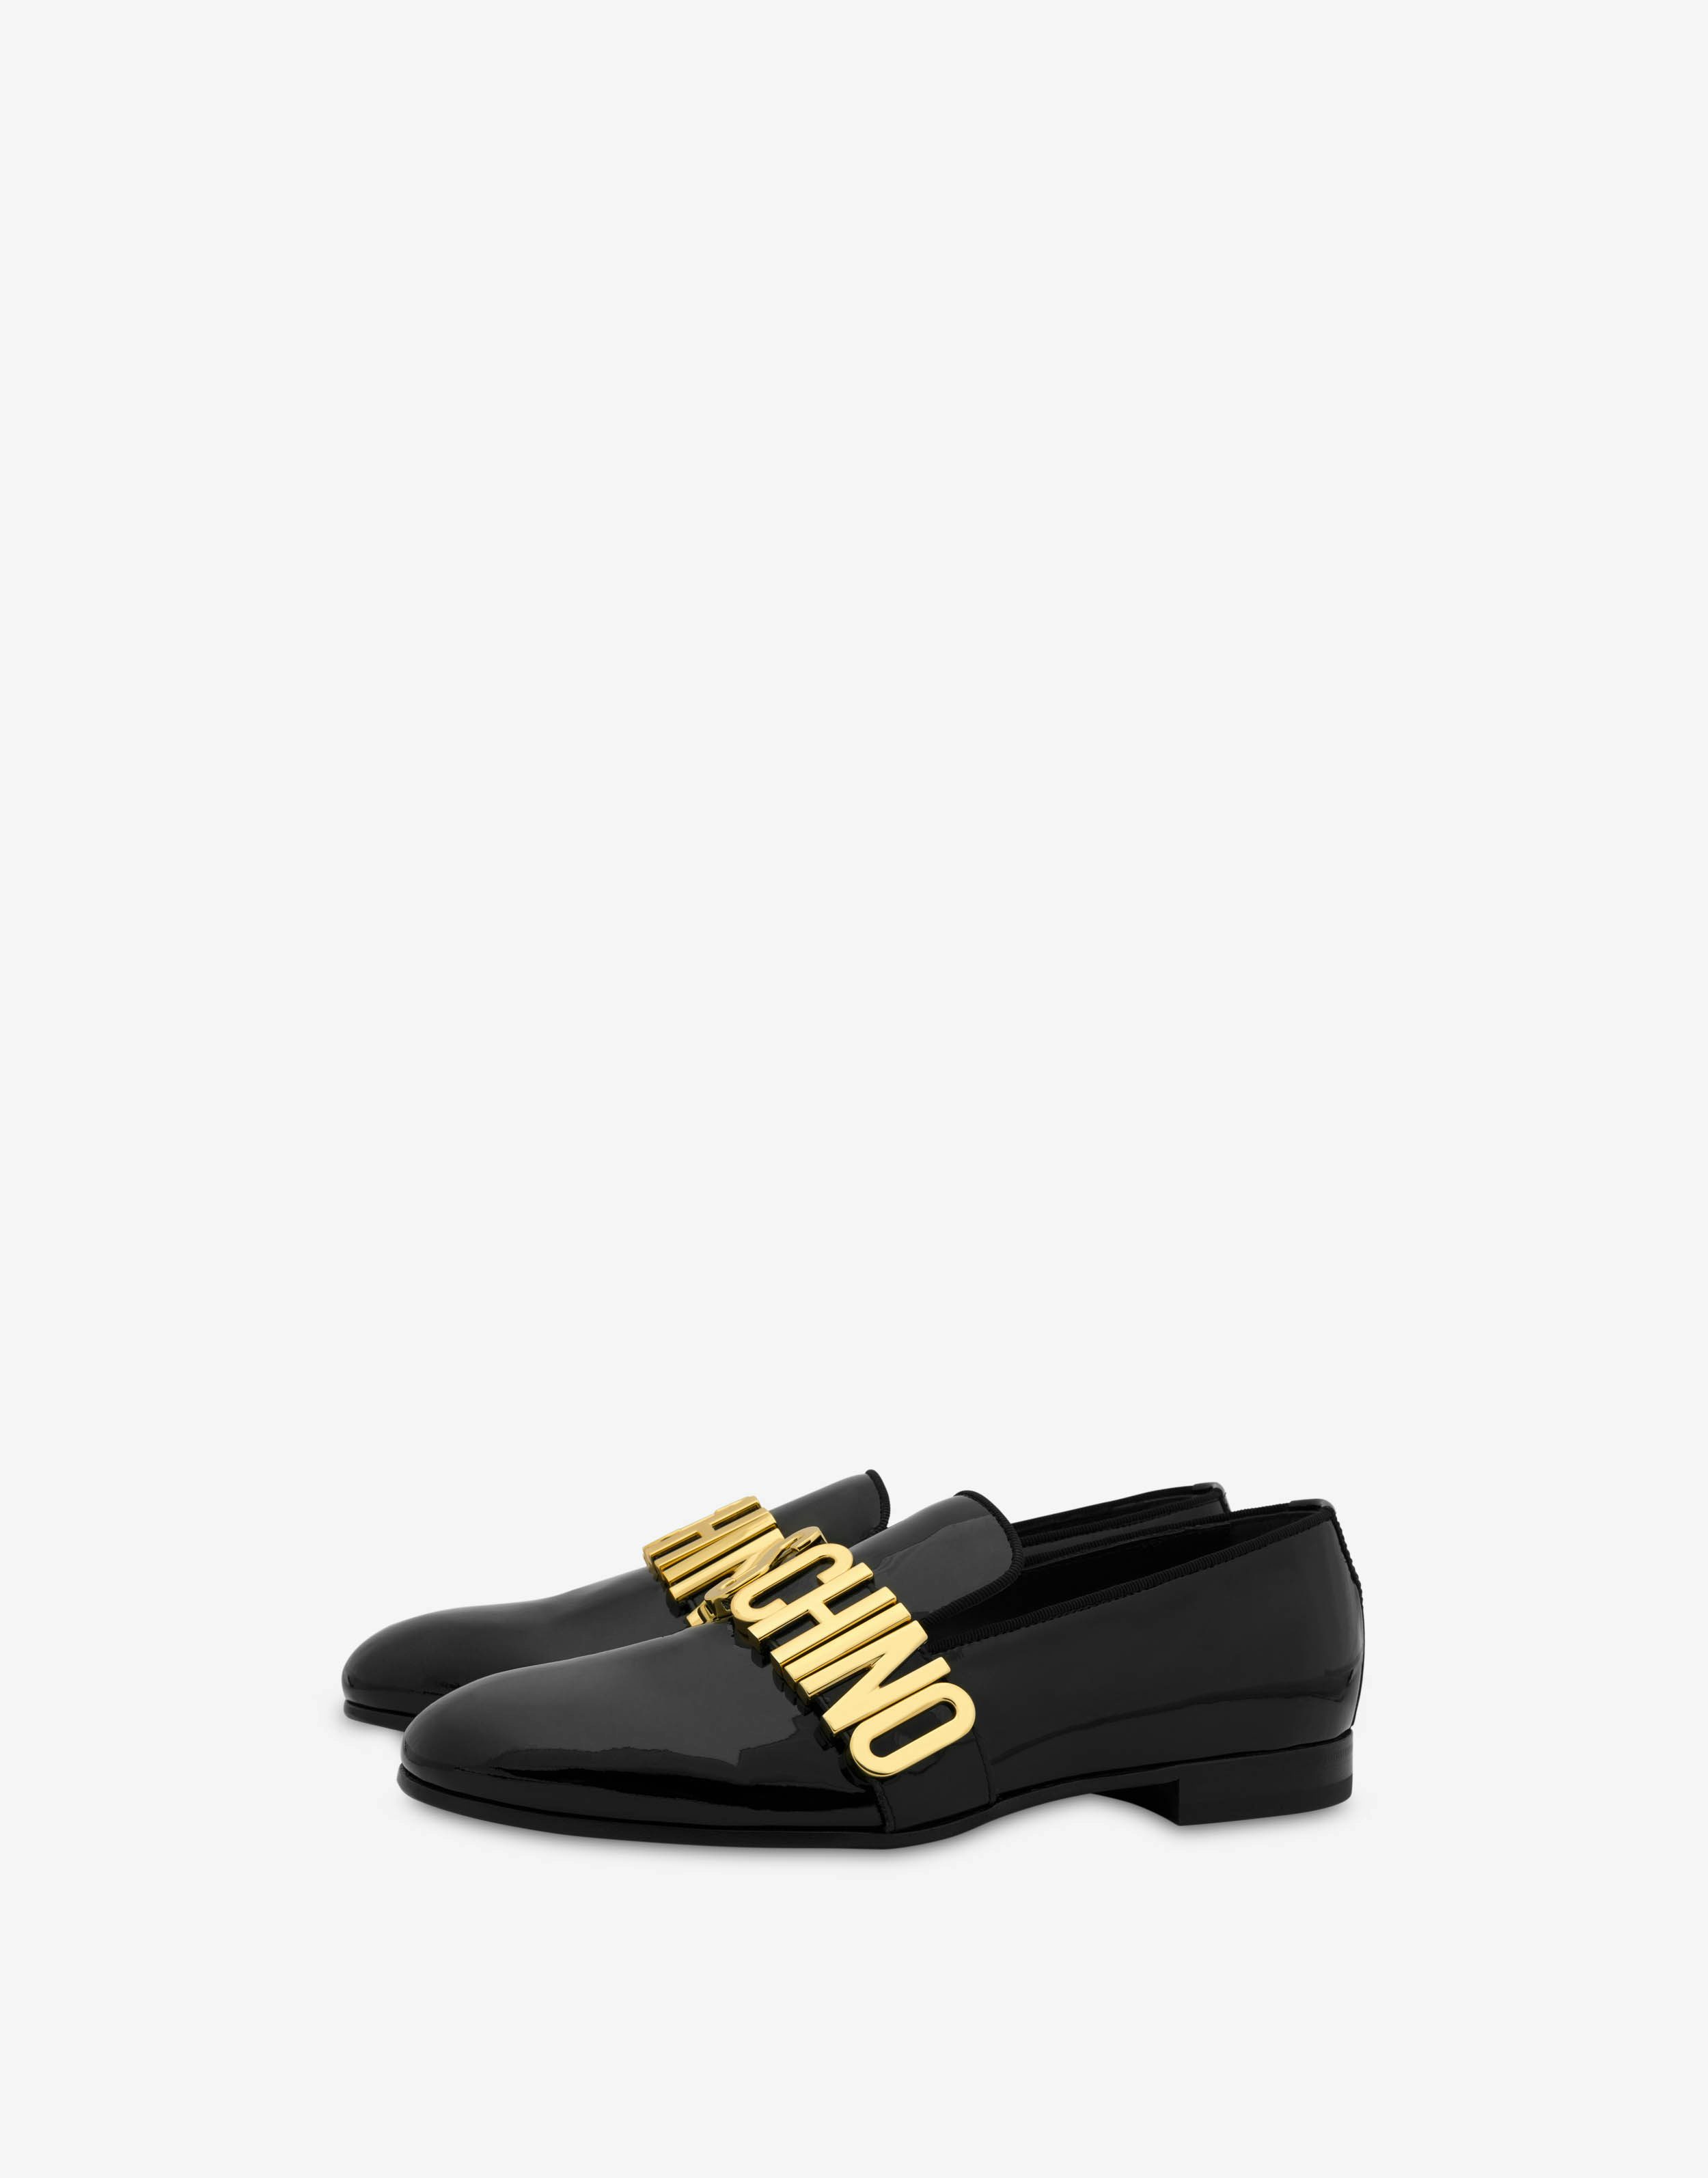 Metal Lettering patent leather loafers